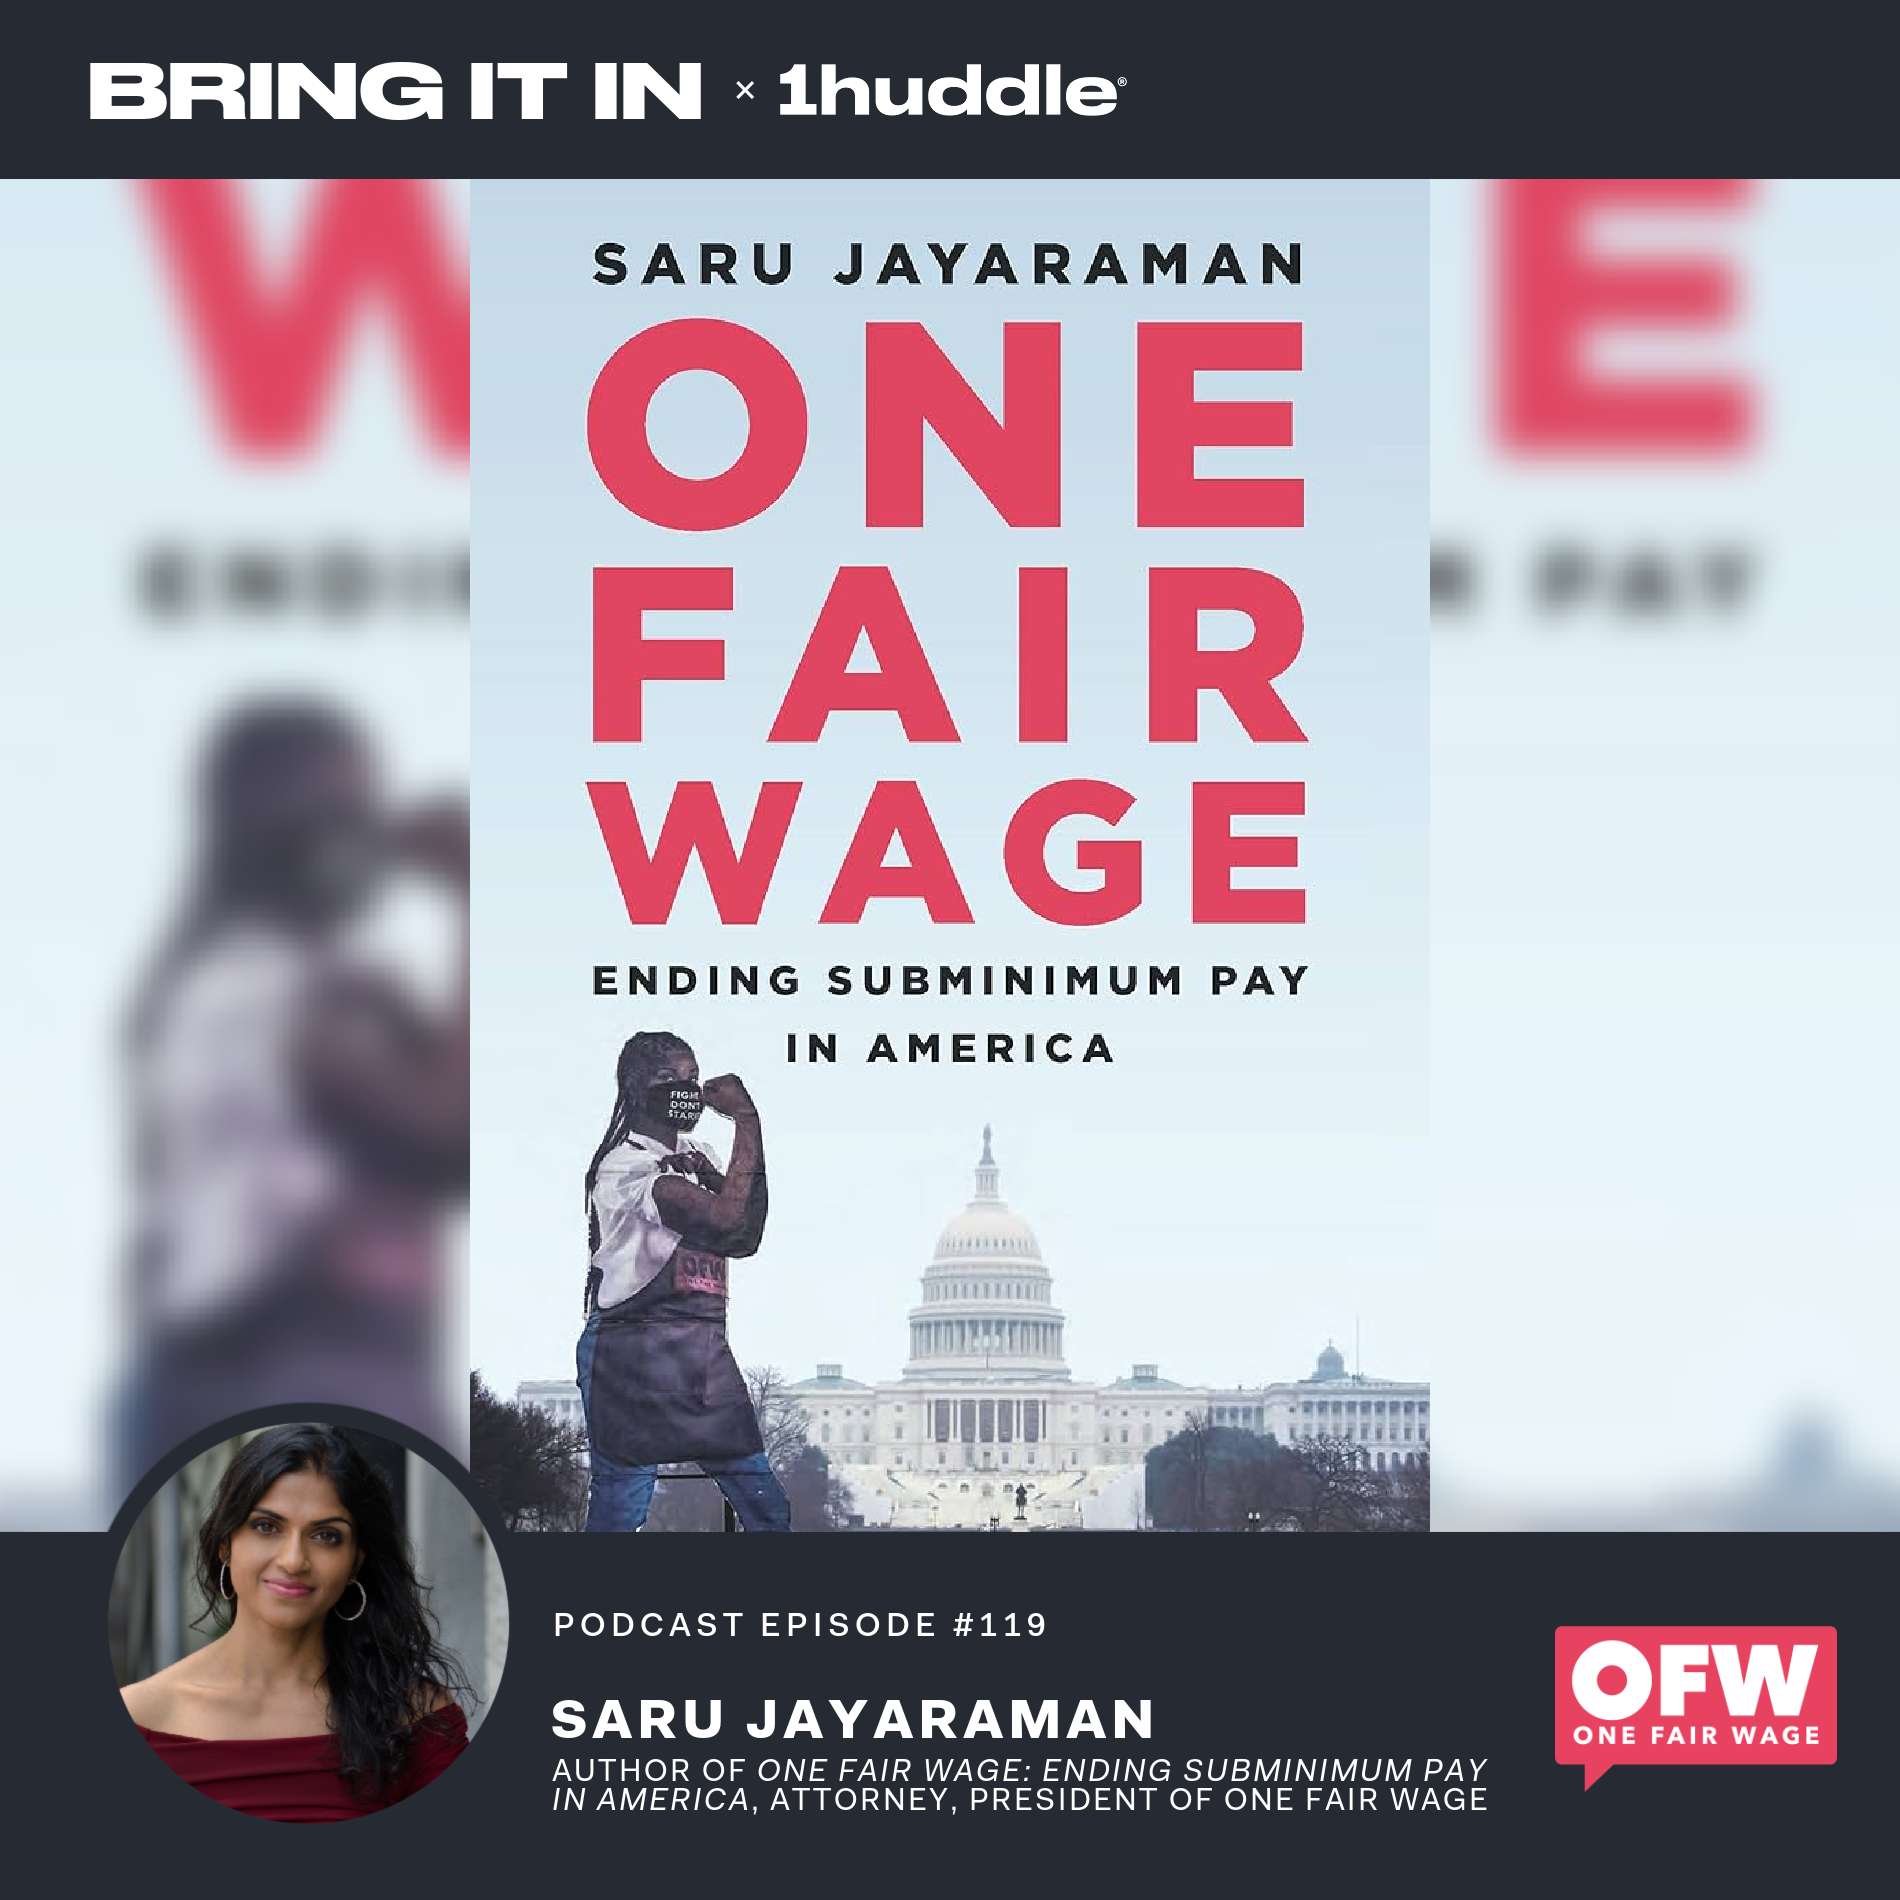 Author of “One Fair Wage: Ending Subminimum Pay in America”